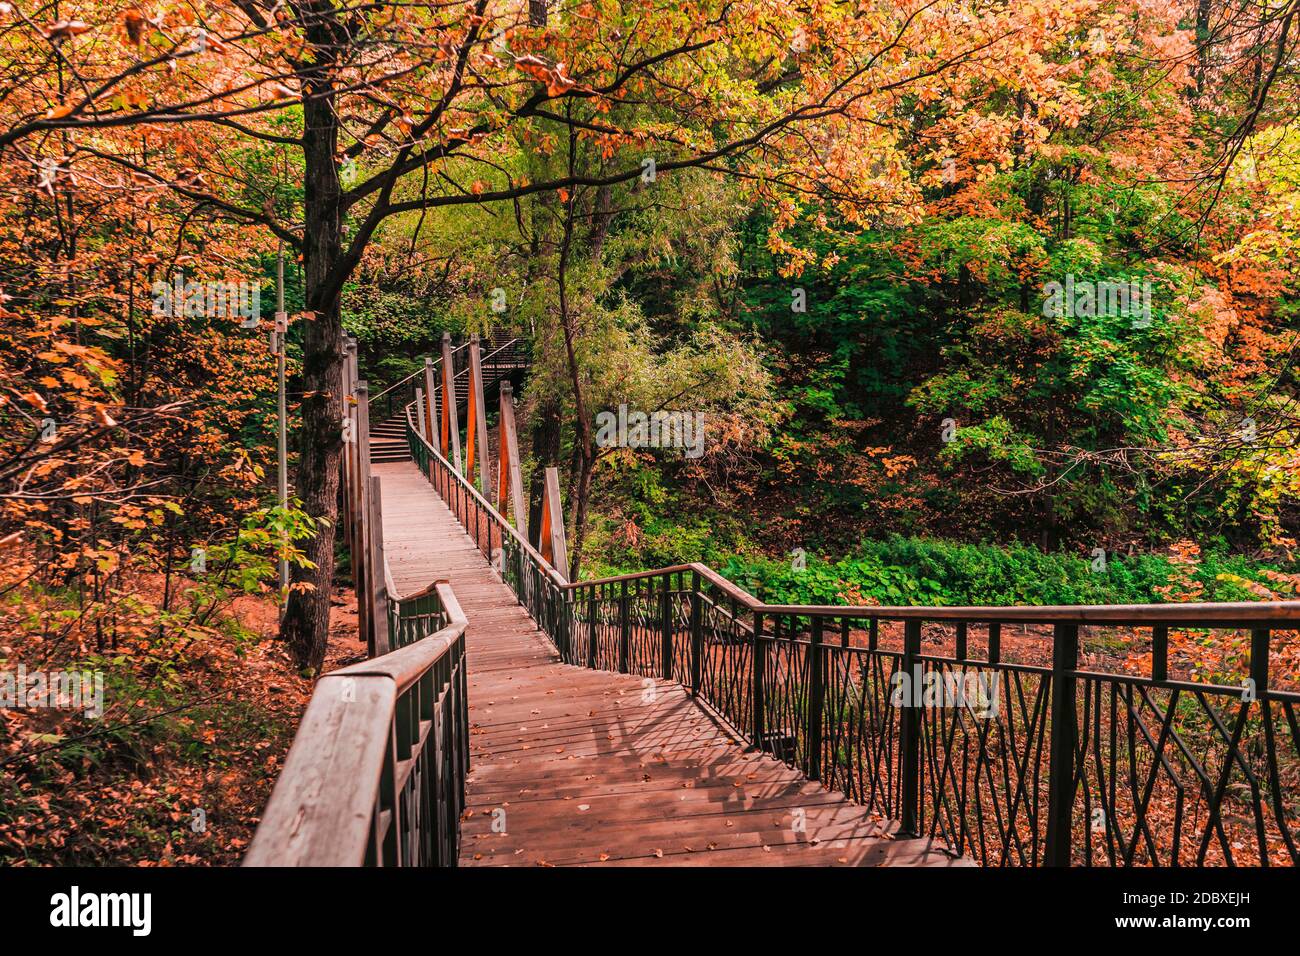 Old pedestrian wooden suspension bridge in the park among the trees. Stock Photo